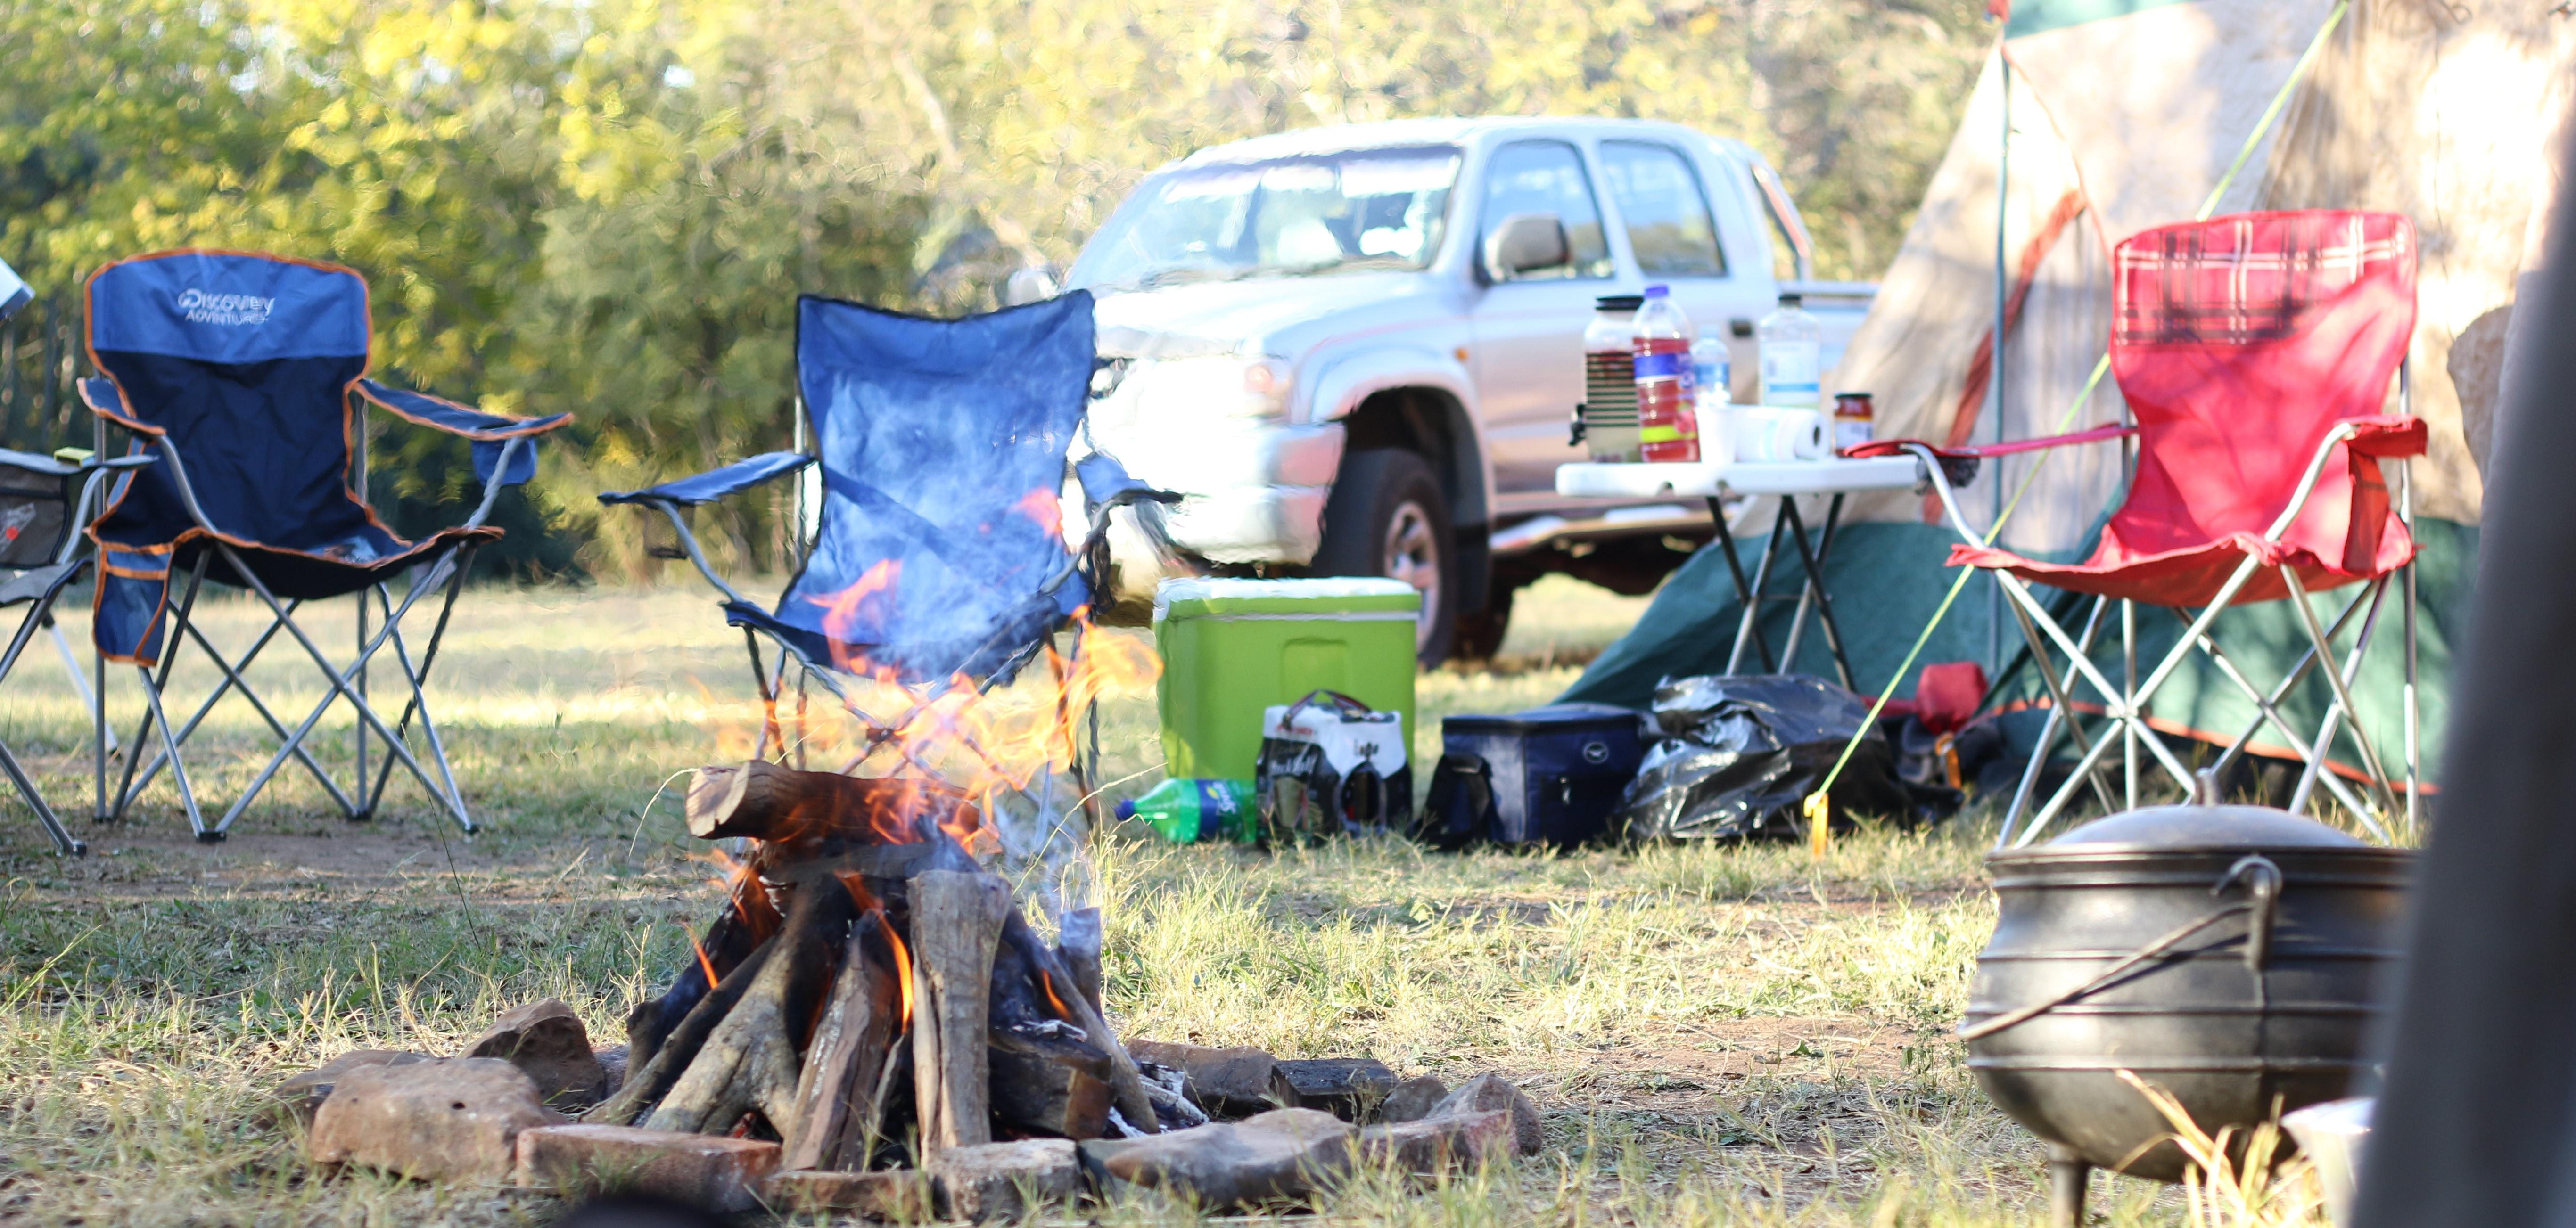 Stock photo of a camp with fire, camping chairs, the side of a tent, and a silver pickup truck in the background